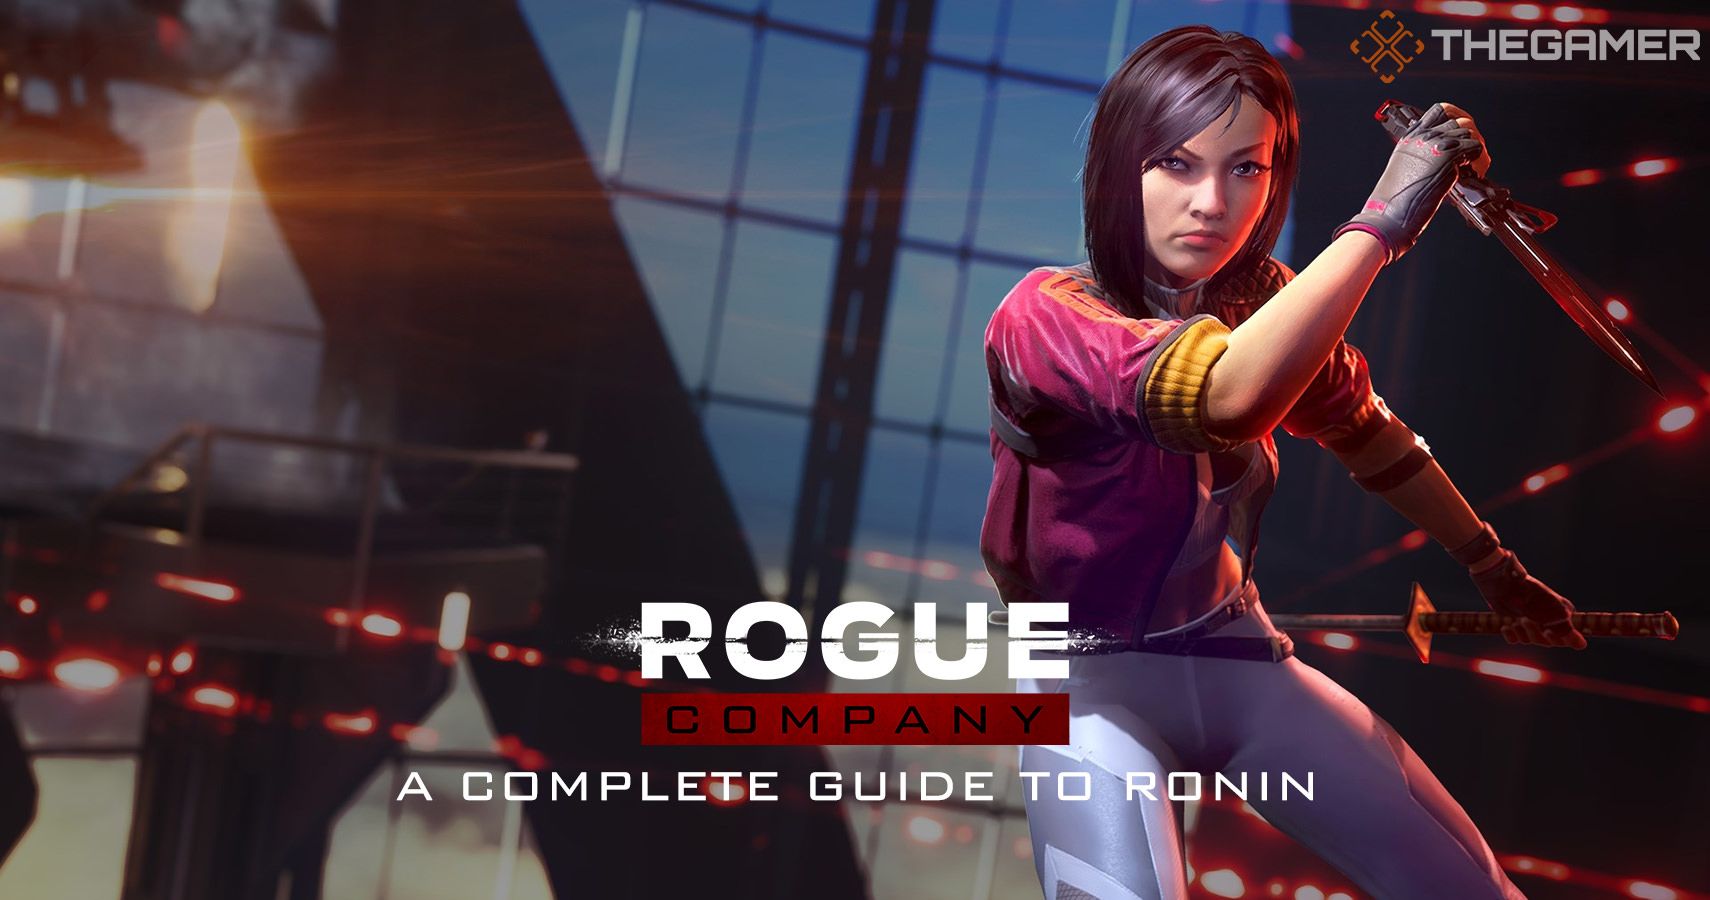 How To Get The Complete Rogue Outfit, Guide